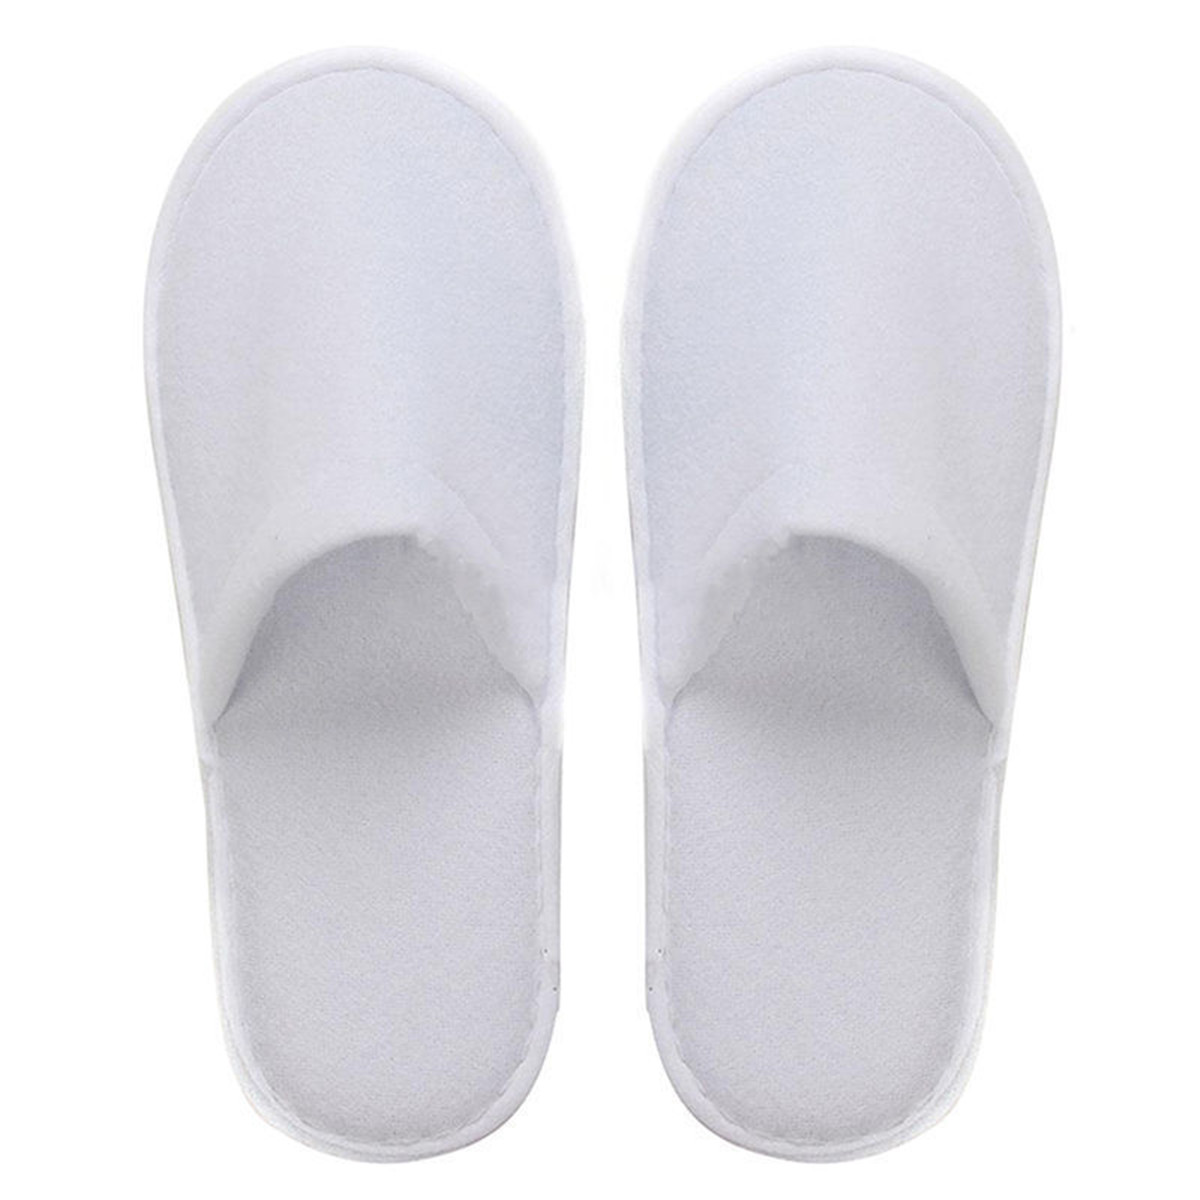 20/50/100Pairs White Disposable Slippers Towelling Hotel SPA Home Floor Slippers For Unisex Guest Breathable Indoor Shoes